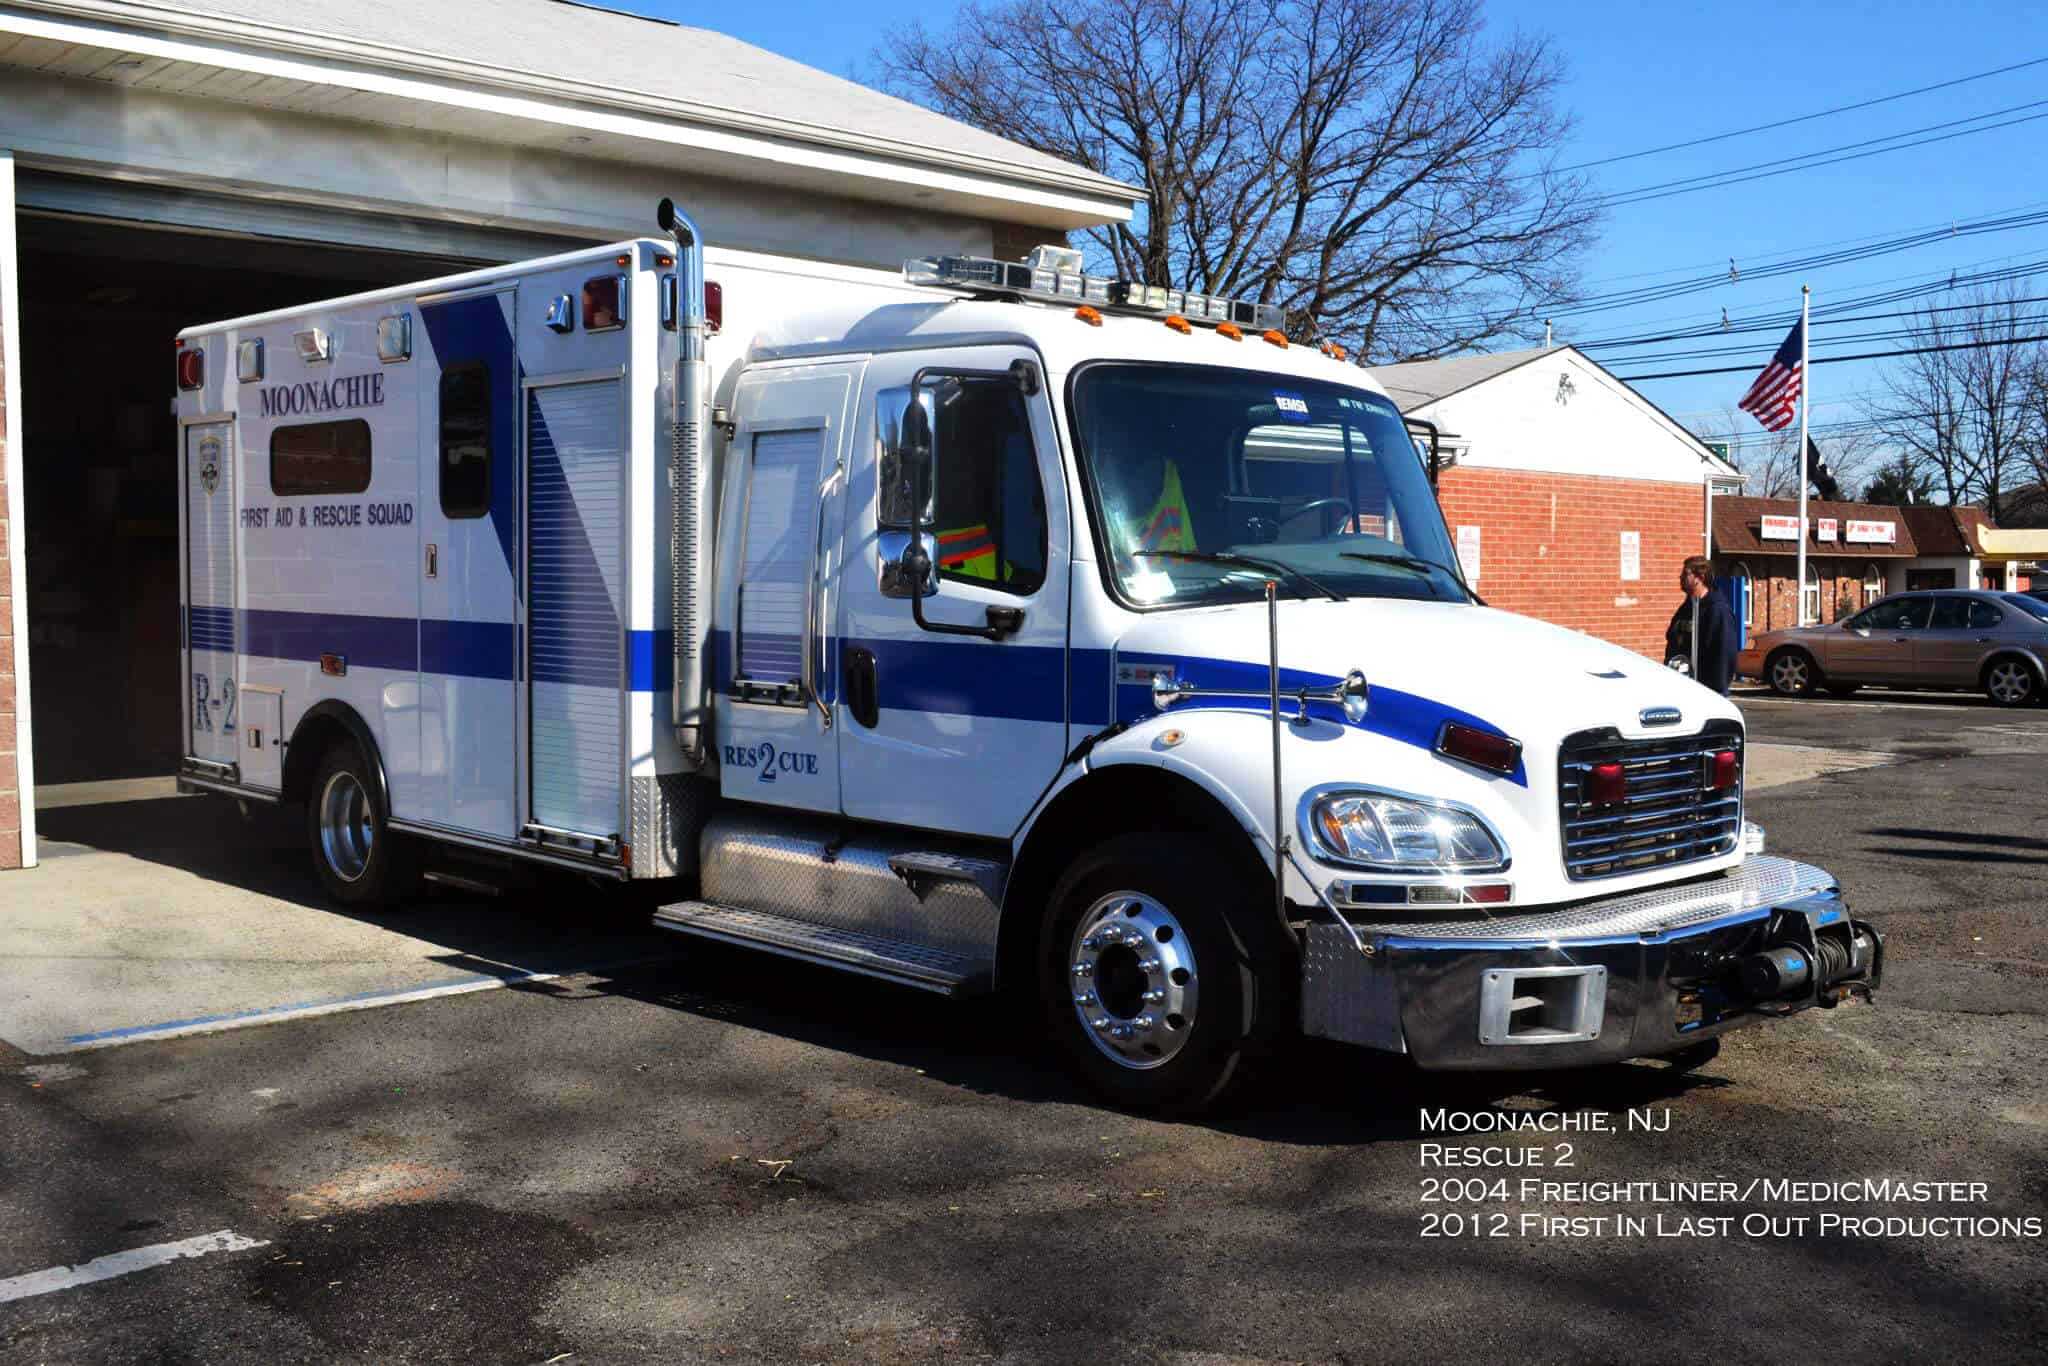 Moonachie First Aid and Rescue Squad Truck